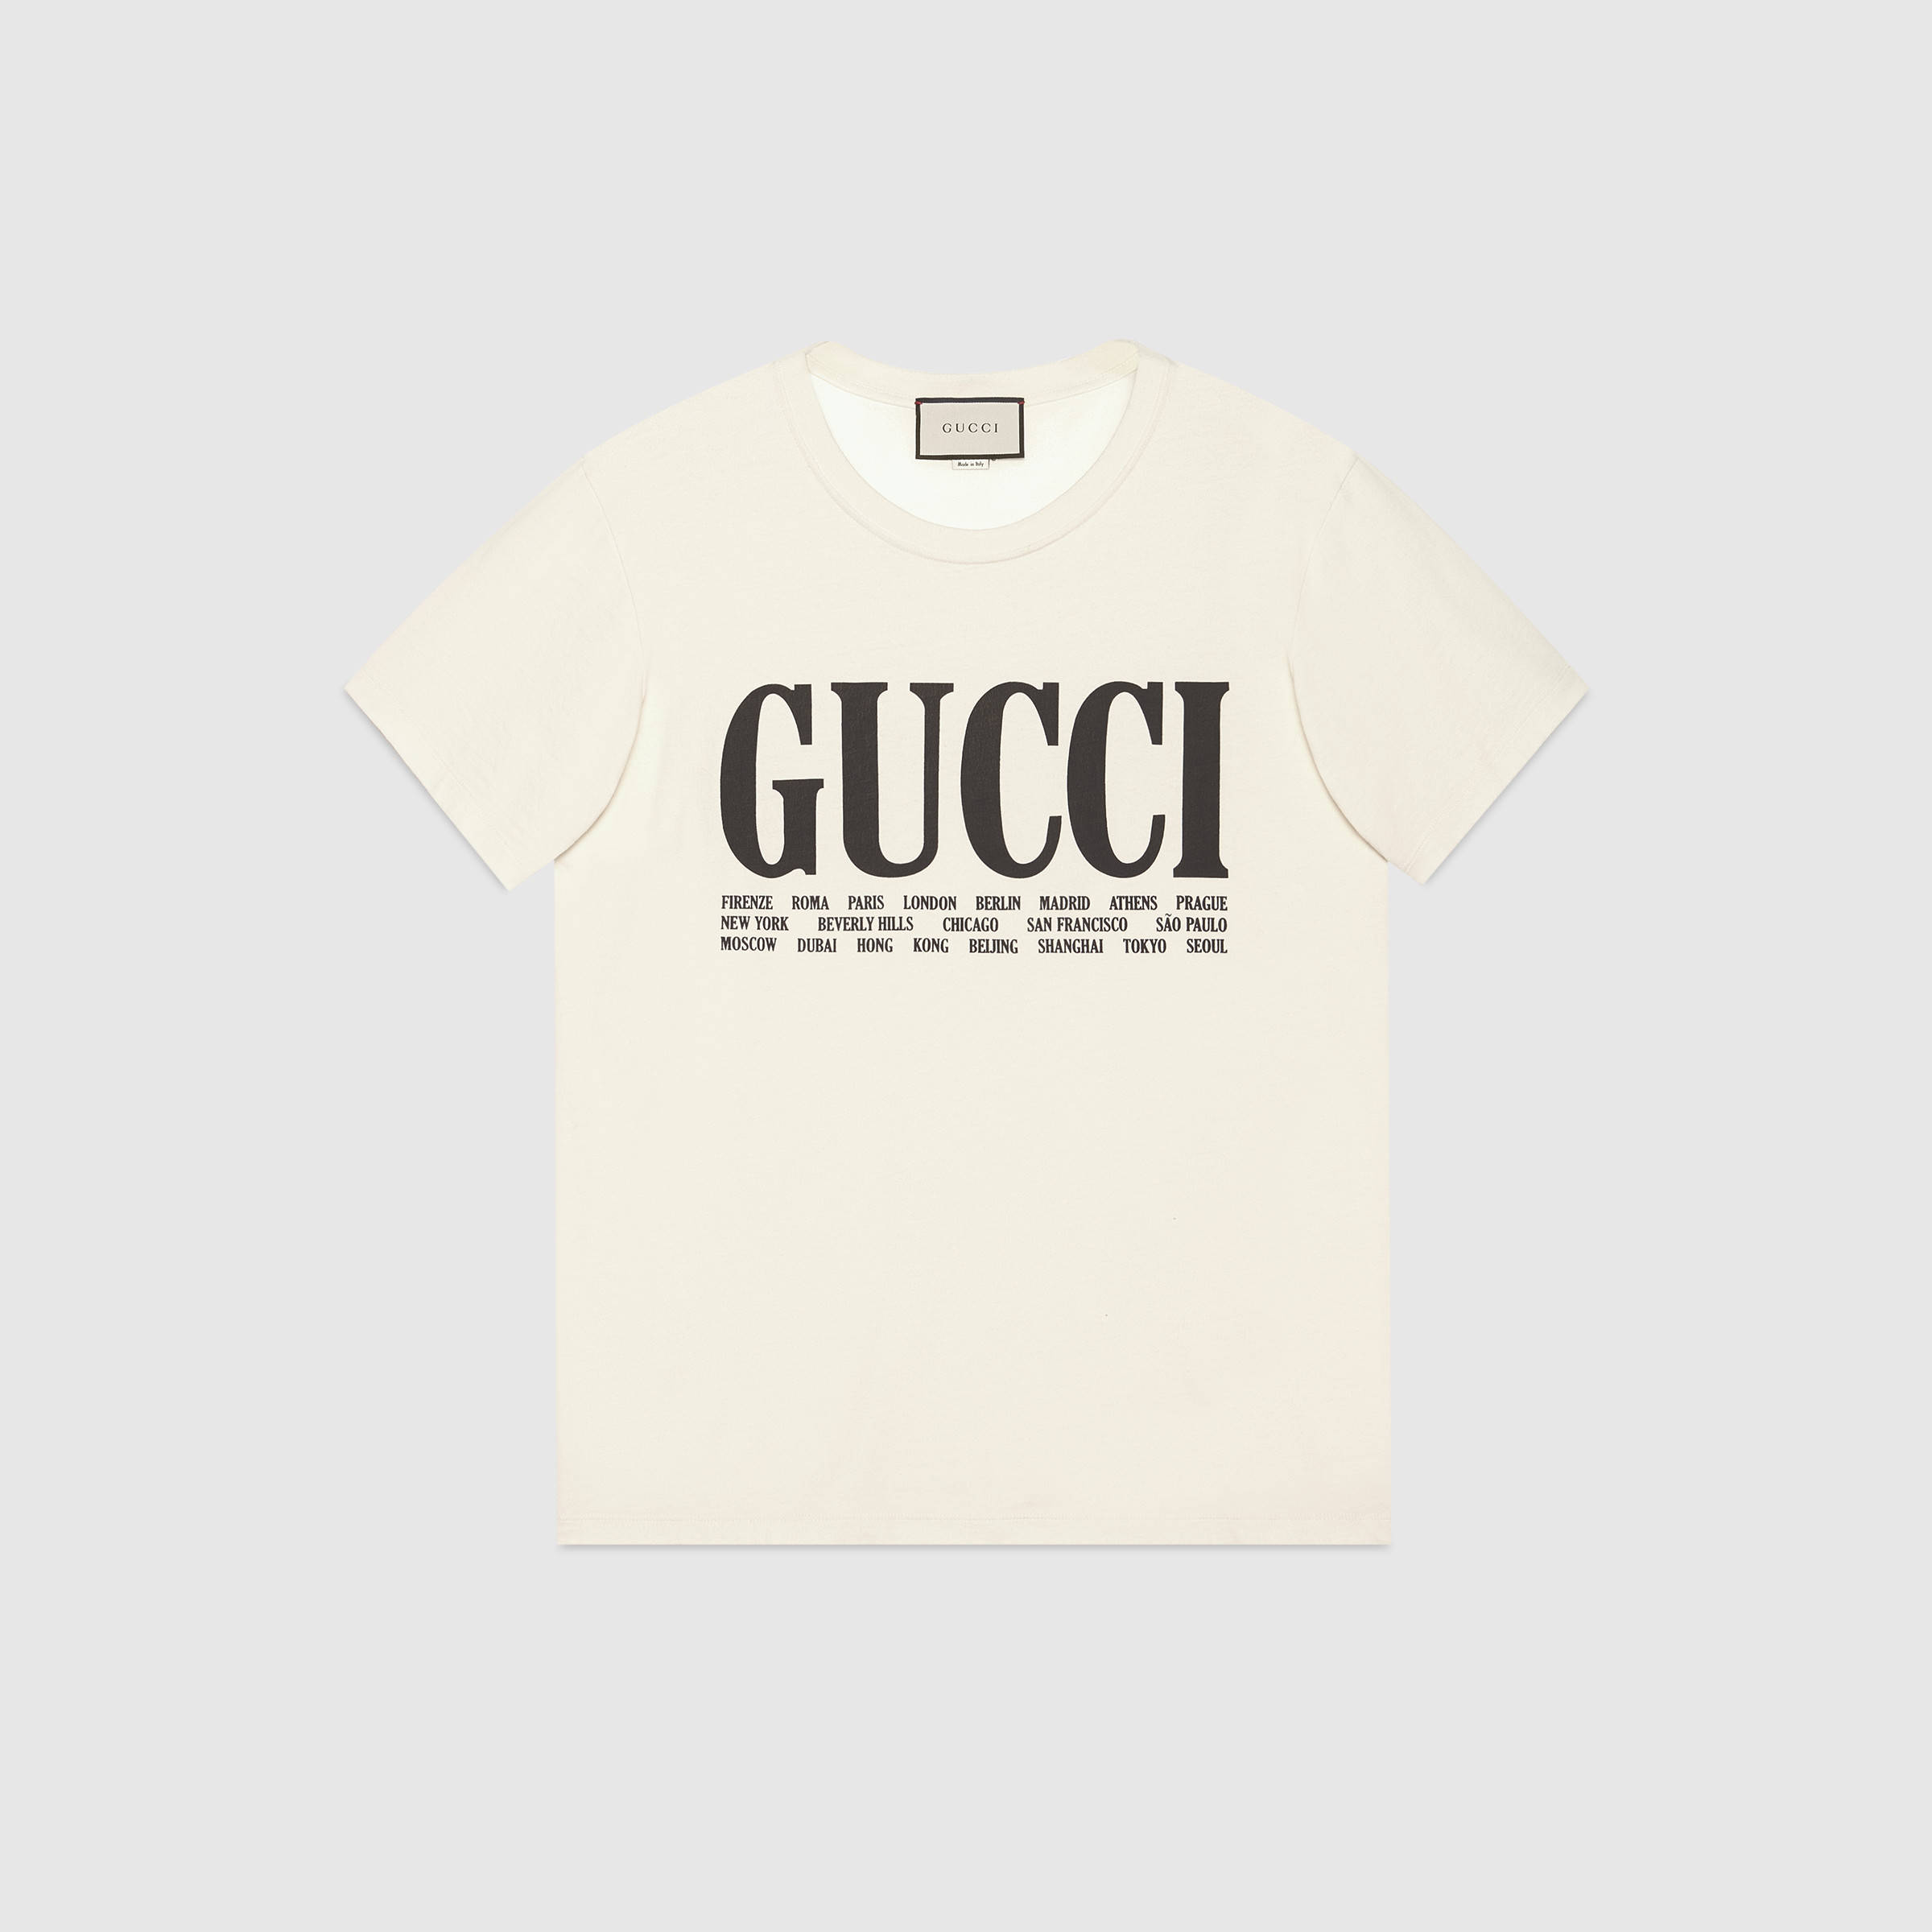 Gucci Launches New Spring/Summer 2018 Tees